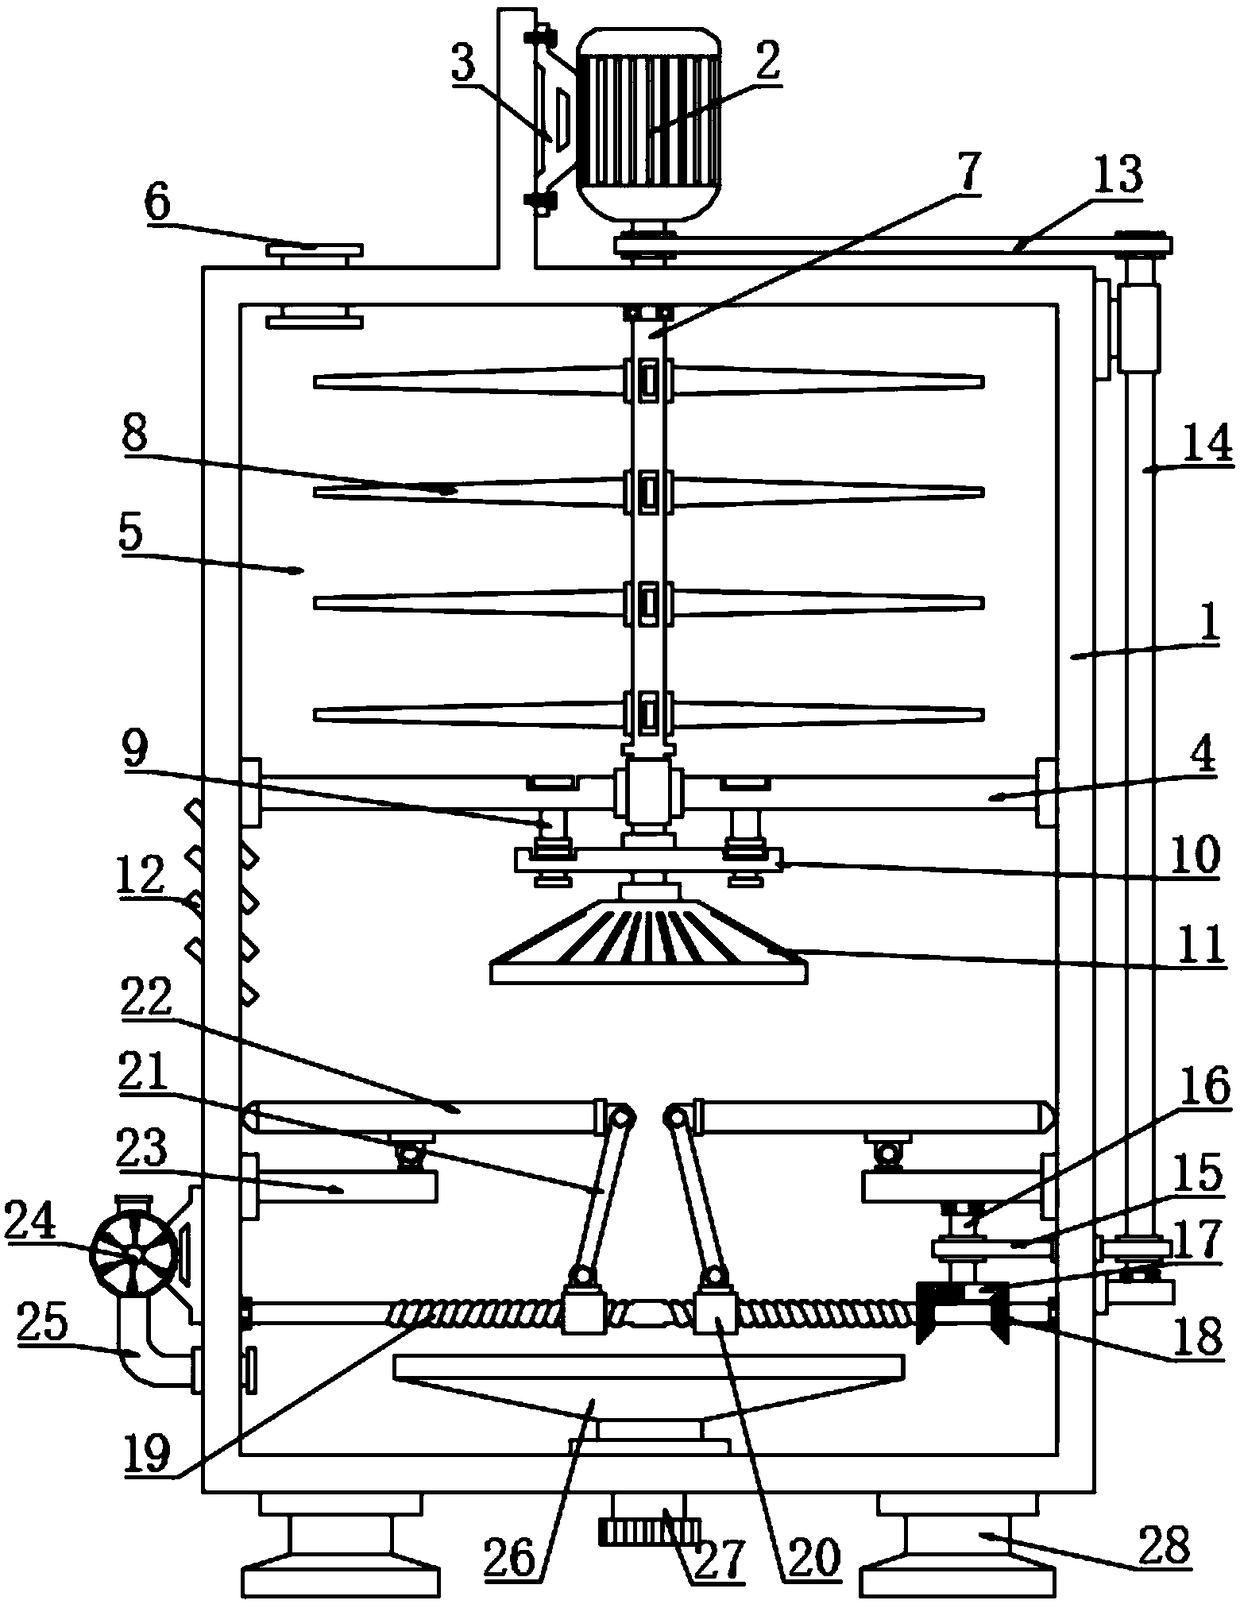 Agricultural unhulled rice drying device